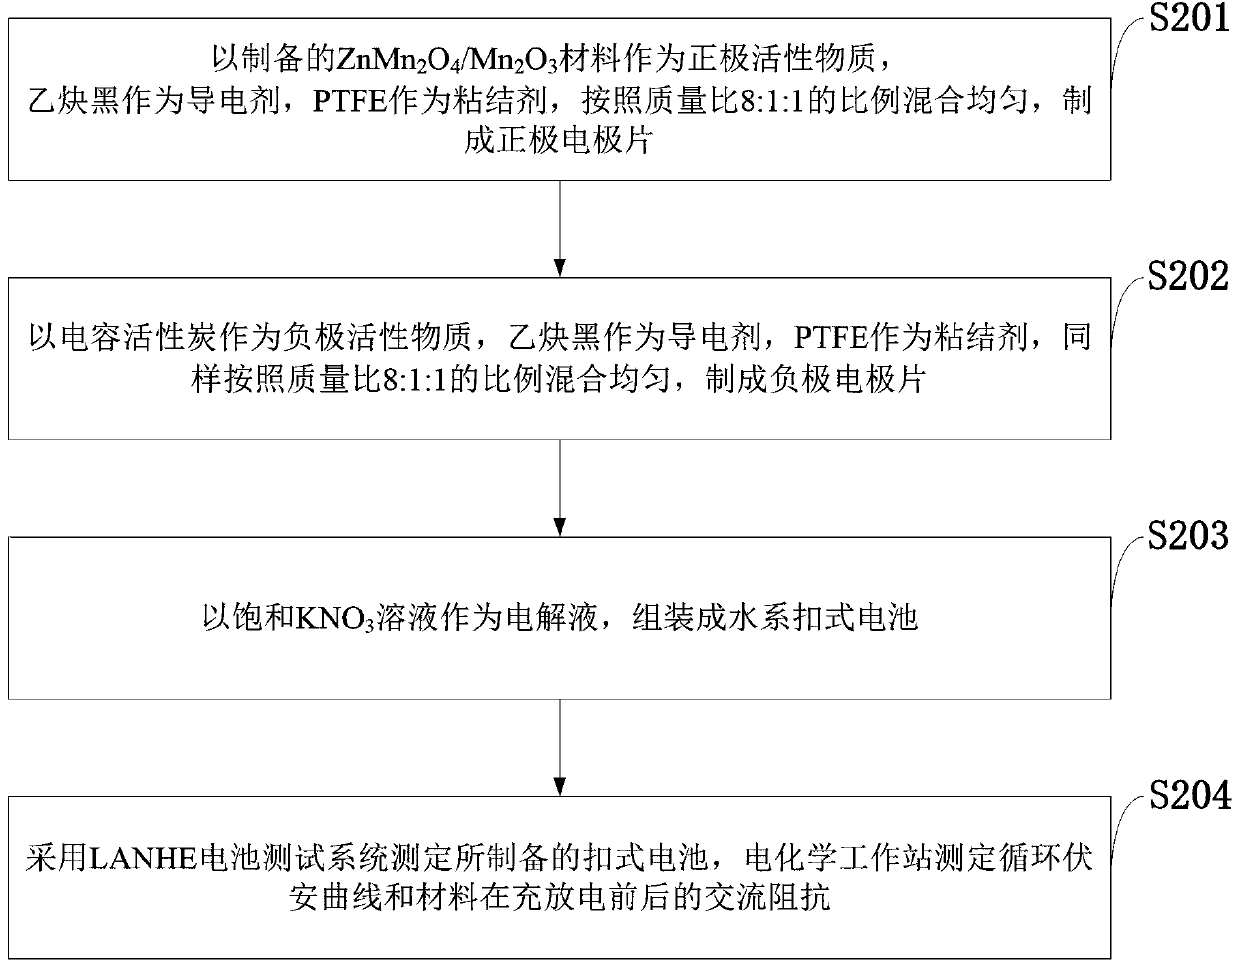 Preparation of ZnMn2O4/Mn2O3 composite material and method for testing electrochemical performance of ZnMn2O4/Mn2O3 composite material